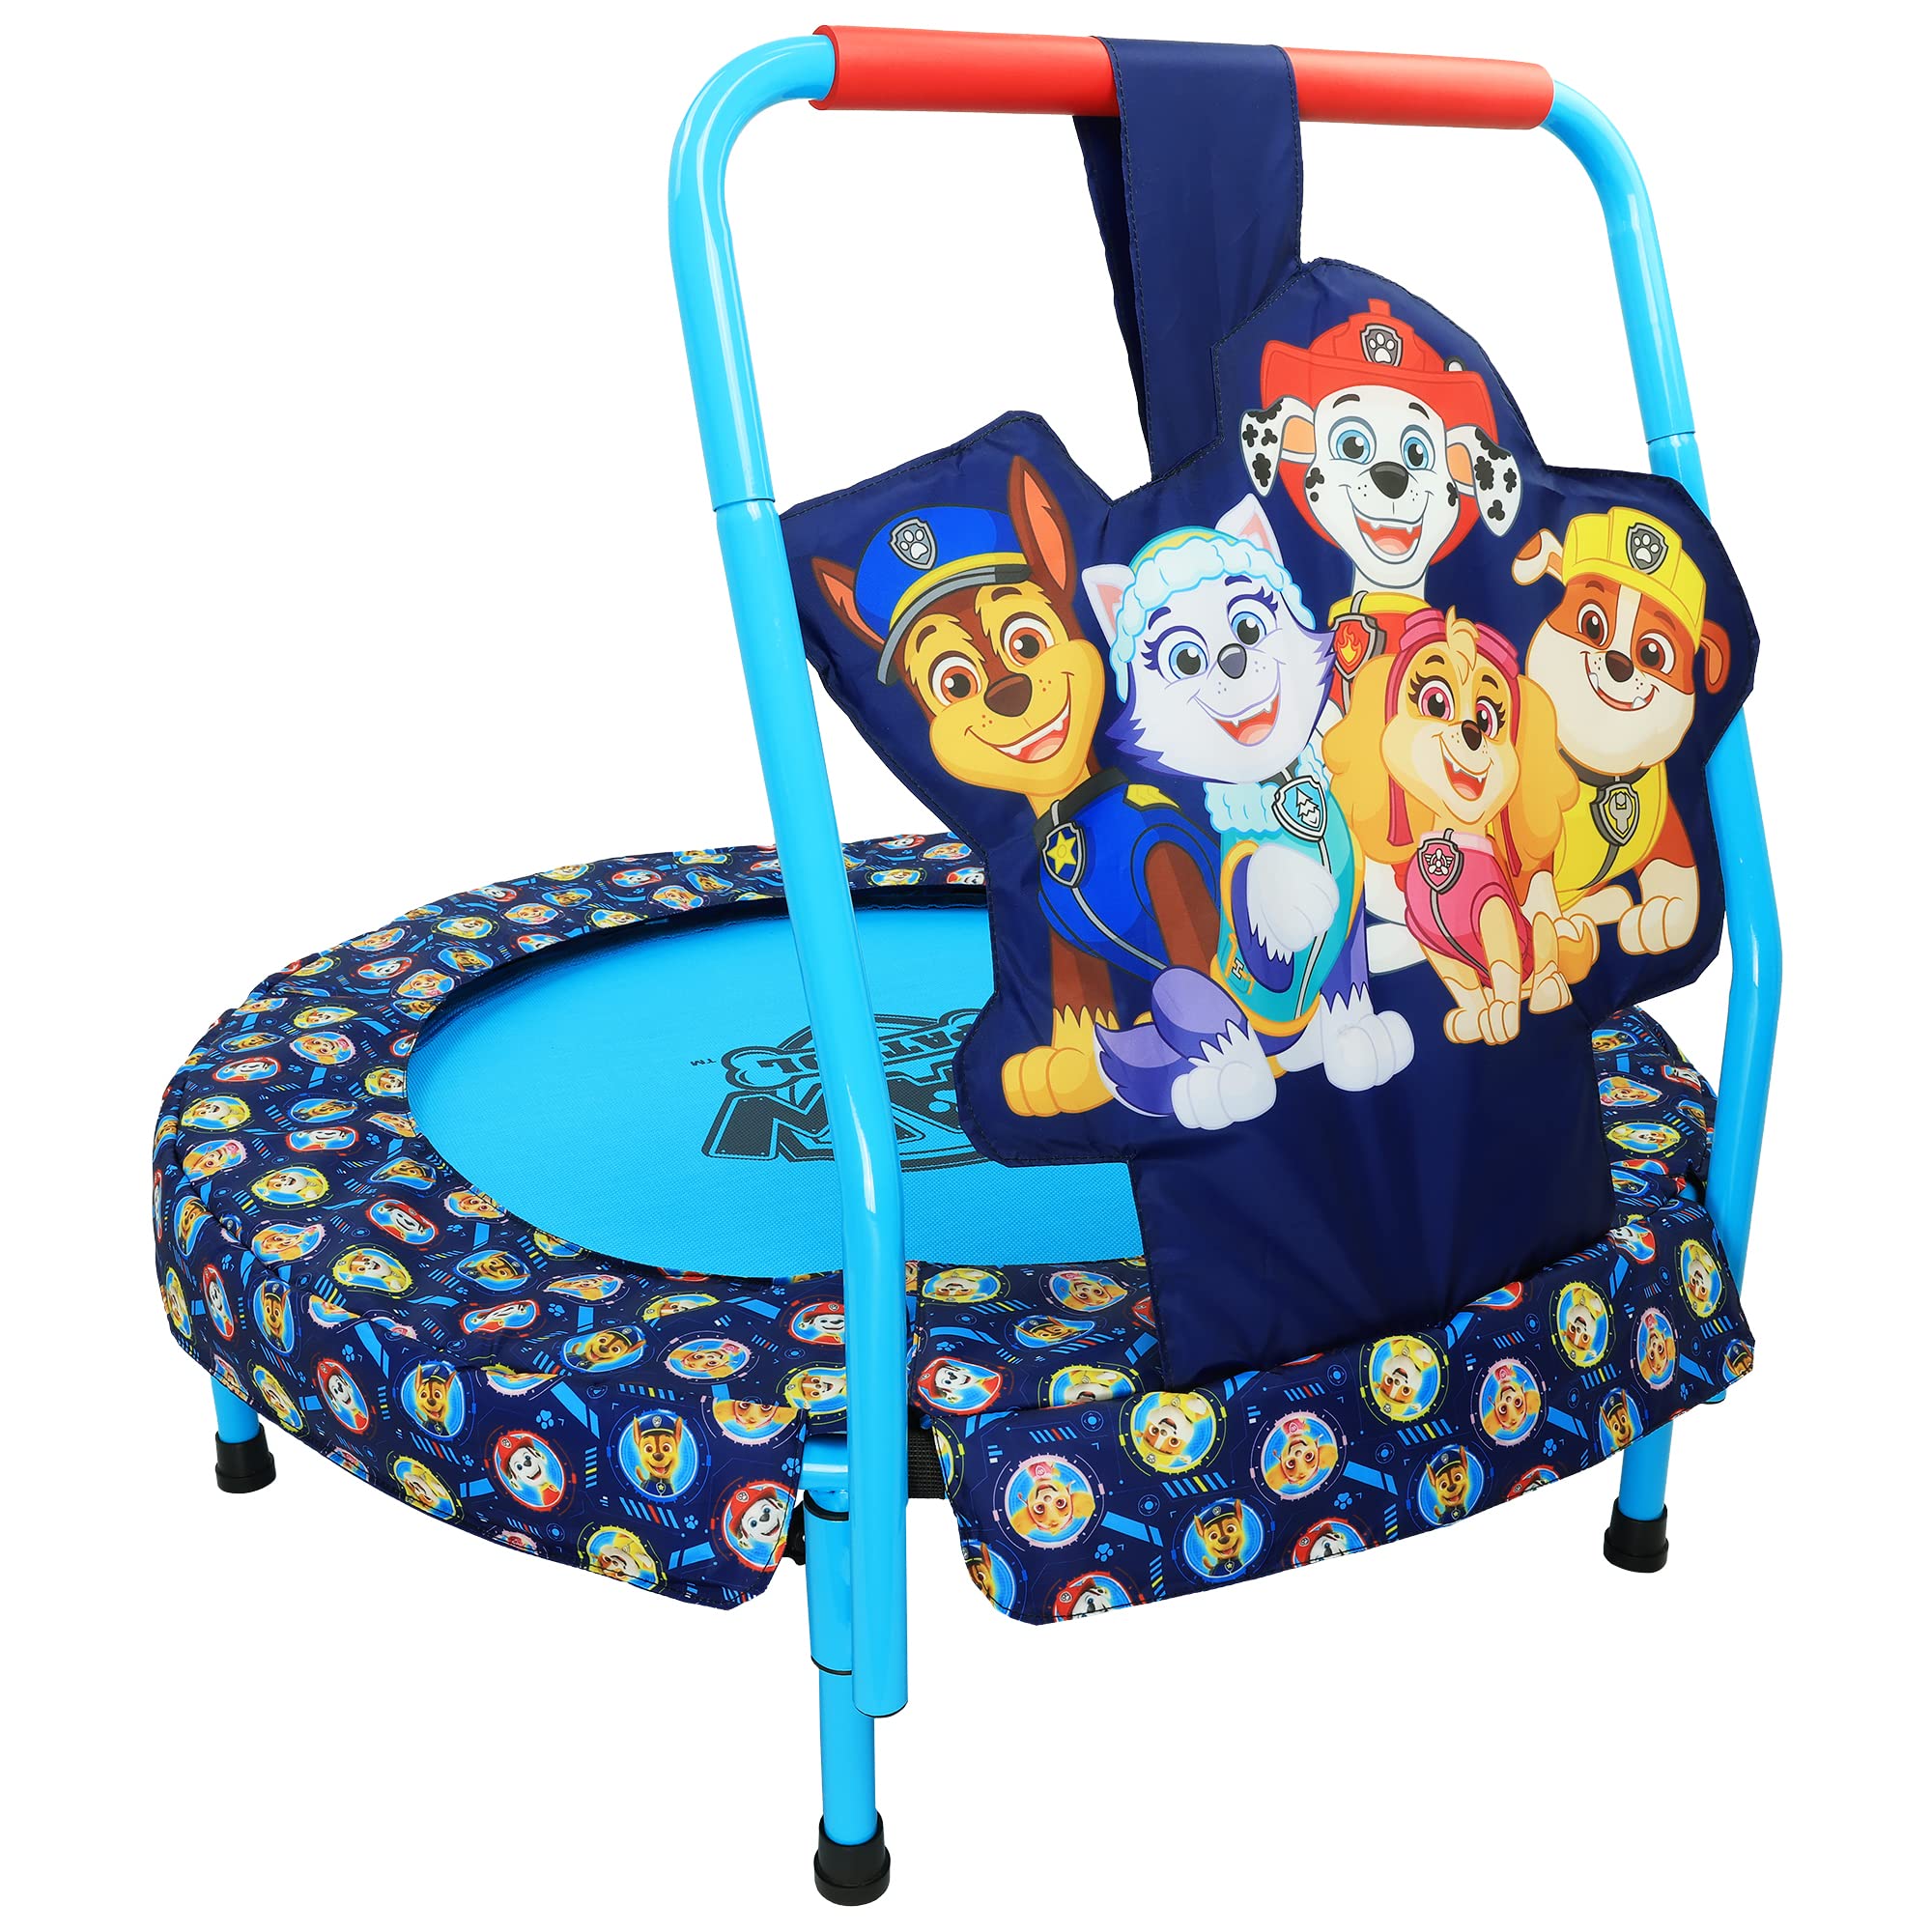 PAW Patrol Mini Trampoline, Indoor Kids Trampoline for Toddlers with Handle, Features Everest, Chase, Marshall, Skye and Rubble, Multi